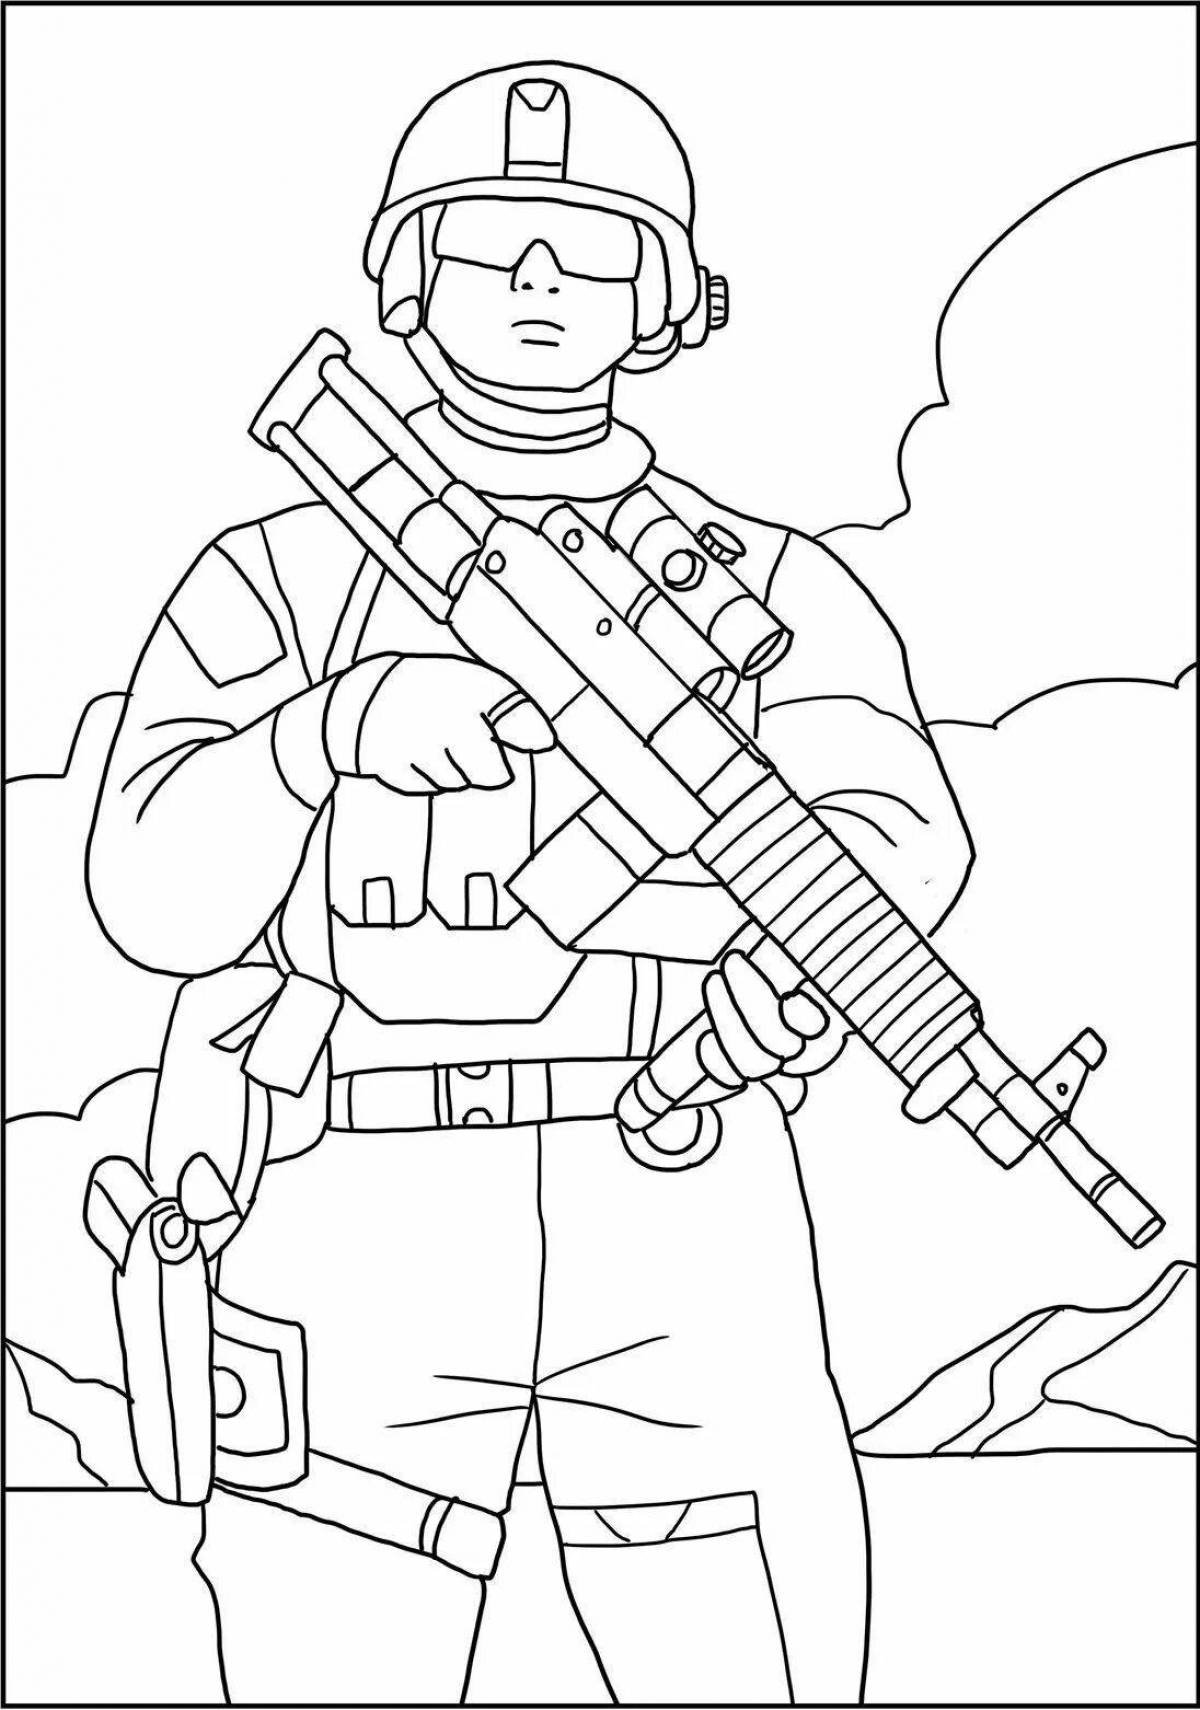 Nice Russian soldier coloring pages for kids